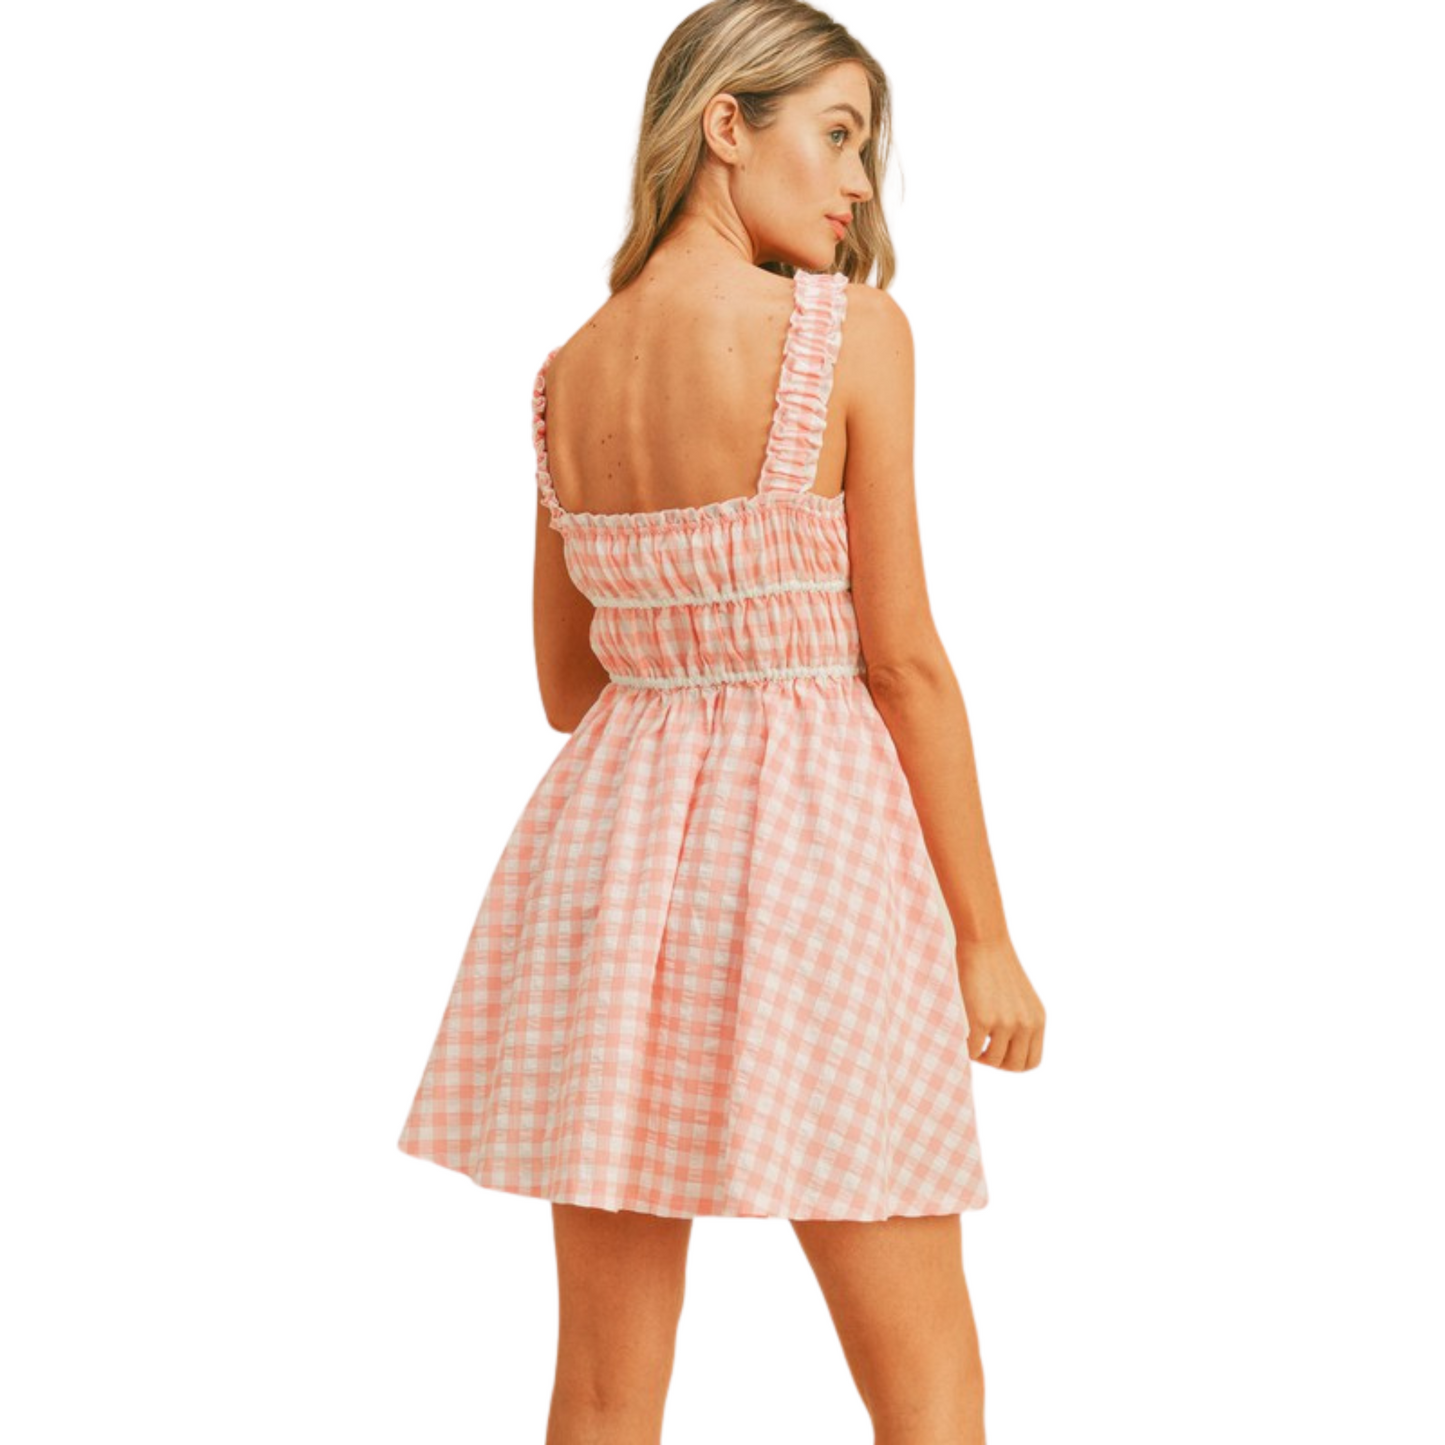 Stay comfortable and on-trend this summer with the Gingham Flared Dress. This flattering mini dress features a classic gingham print in a stylish pink and white color combination. Perfect for both casual and dressier occasions, you'll love this must-have summer look.